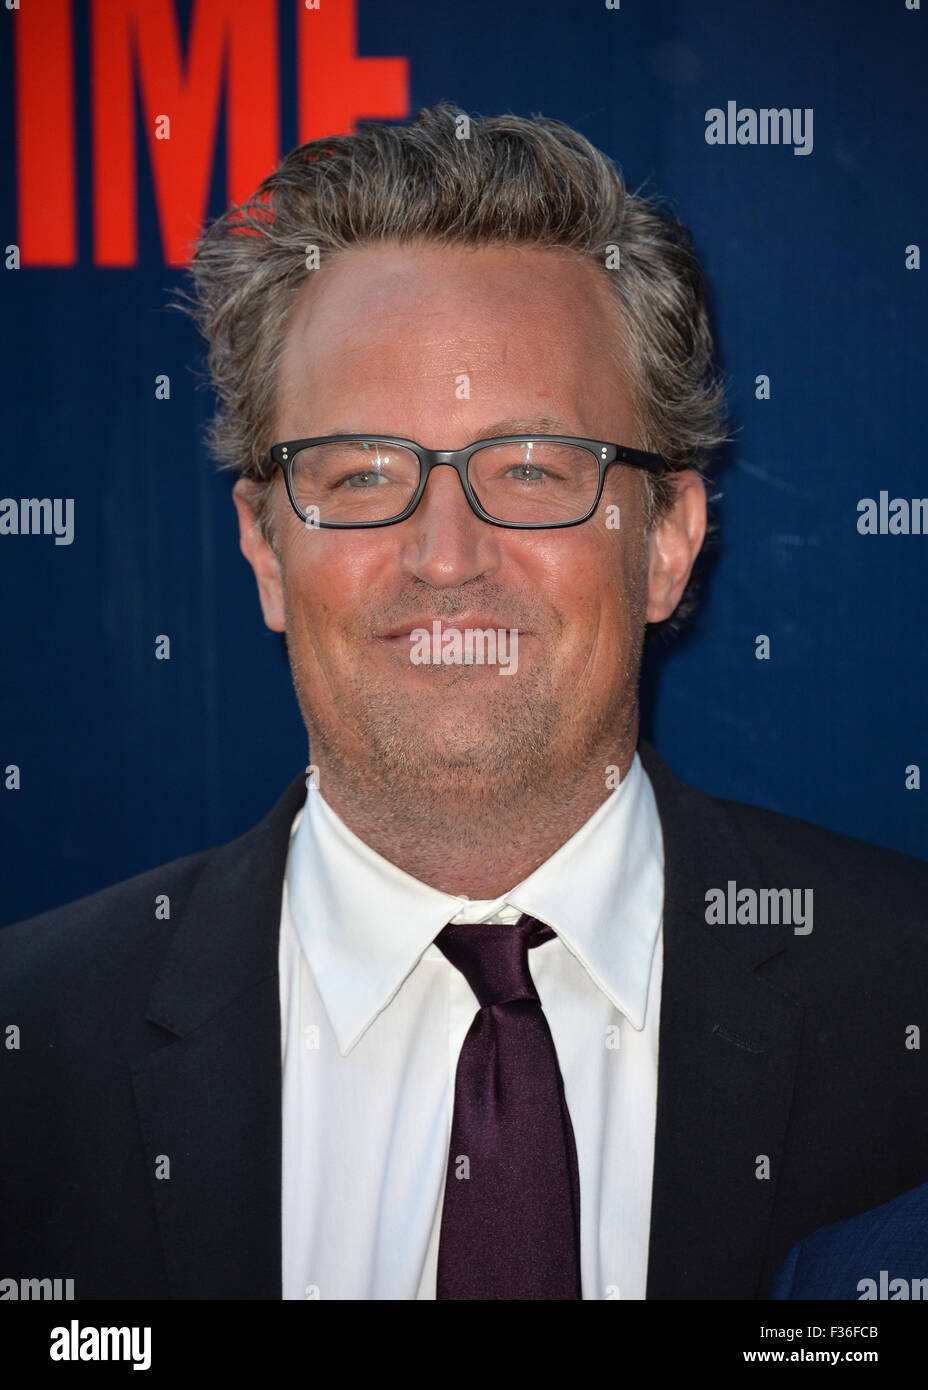 LOS ANGELES, CA - AUGUST 10, 2015: Matthew Perry at the CBS - Showtime & CW Summer TCA Party at the Pacific Design Centre, West Hollywood. Stock Photo